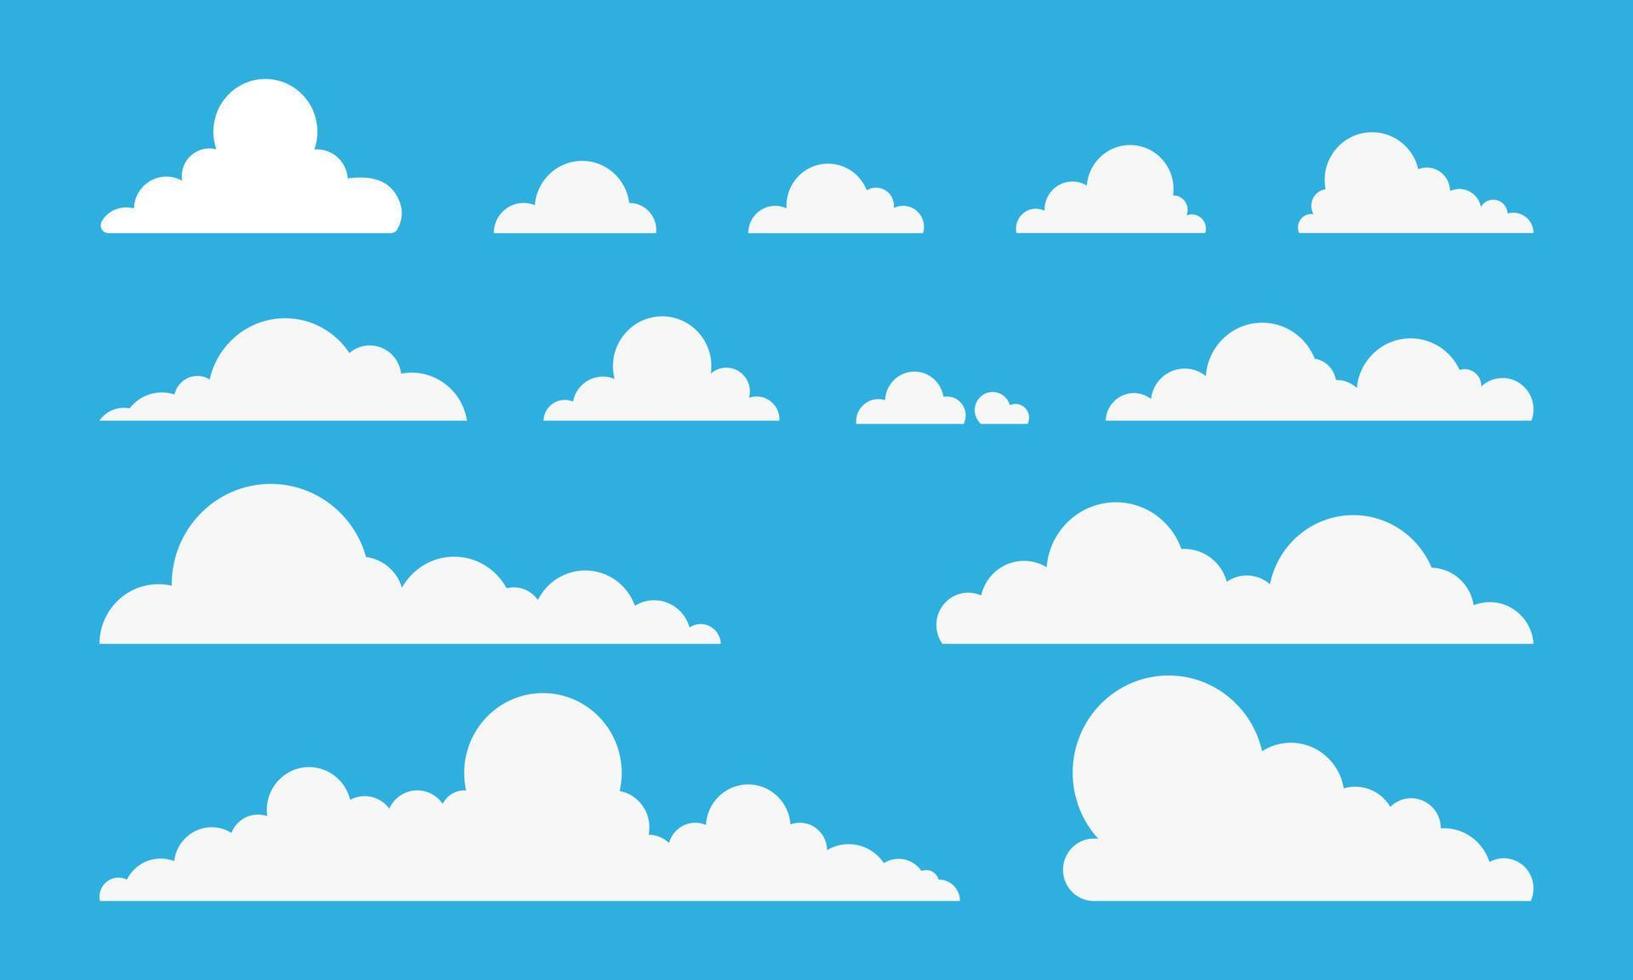 Collection of clouds on a blue sky background vector